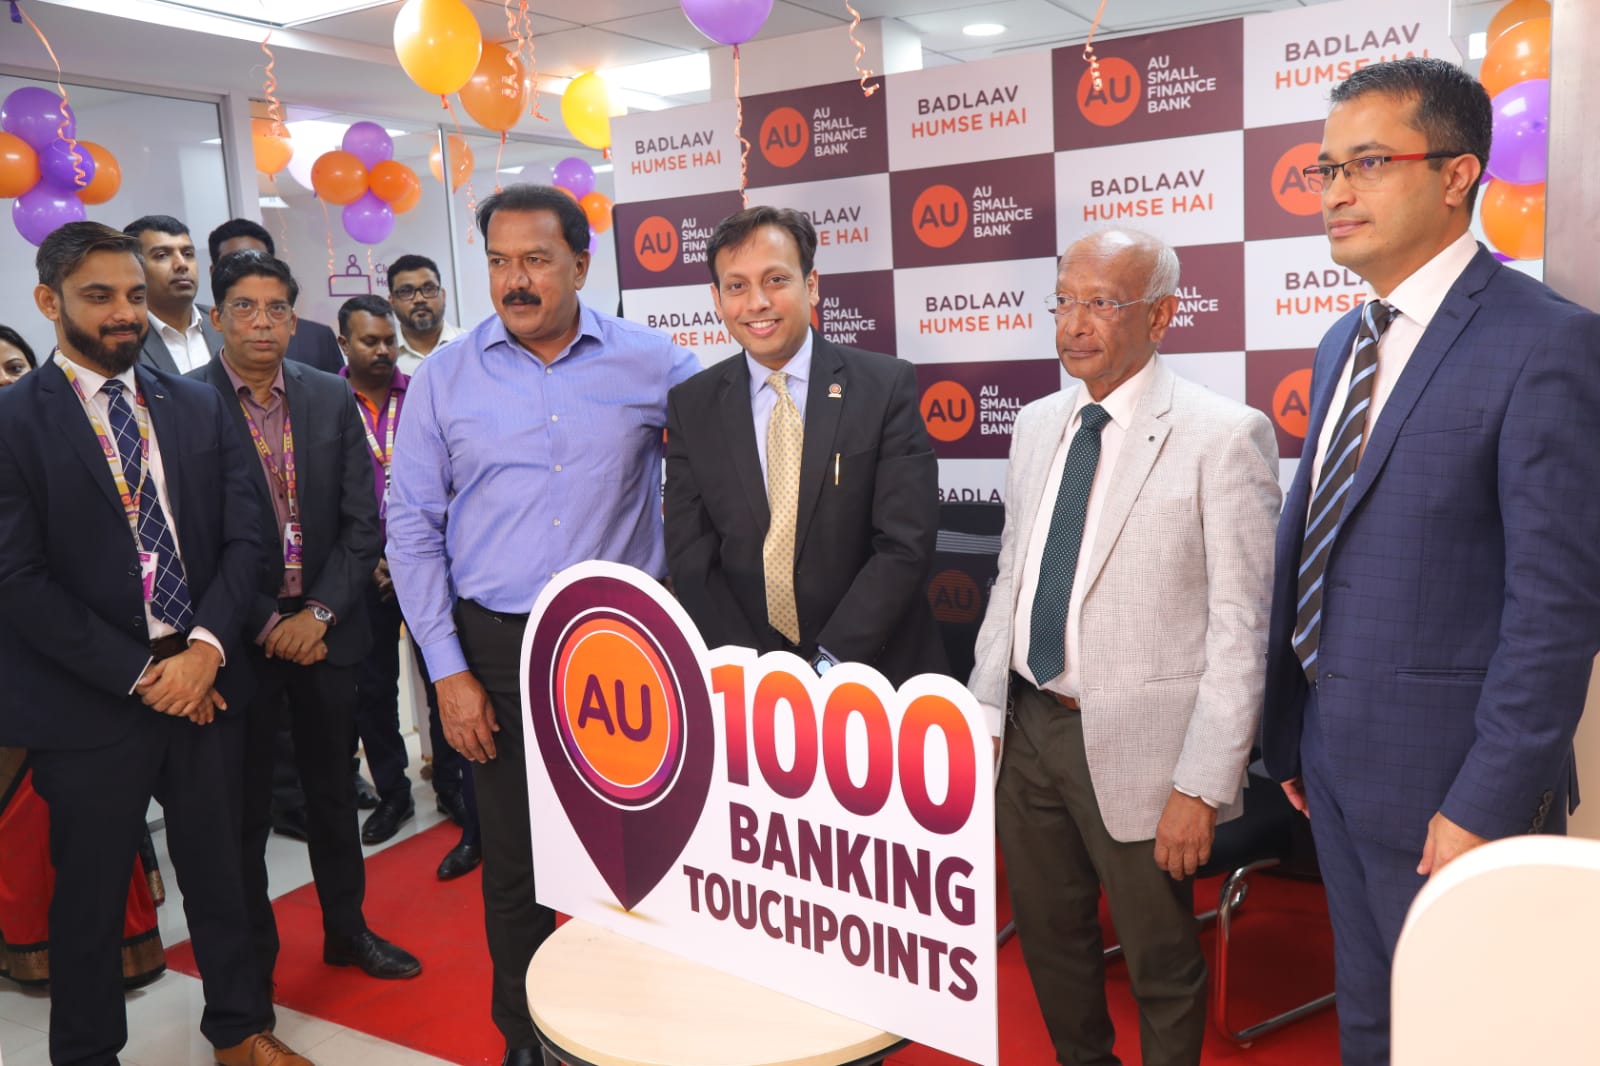 AU Small Finance Bank launches its 1000th Banking Touchpoint | Global Prime  News